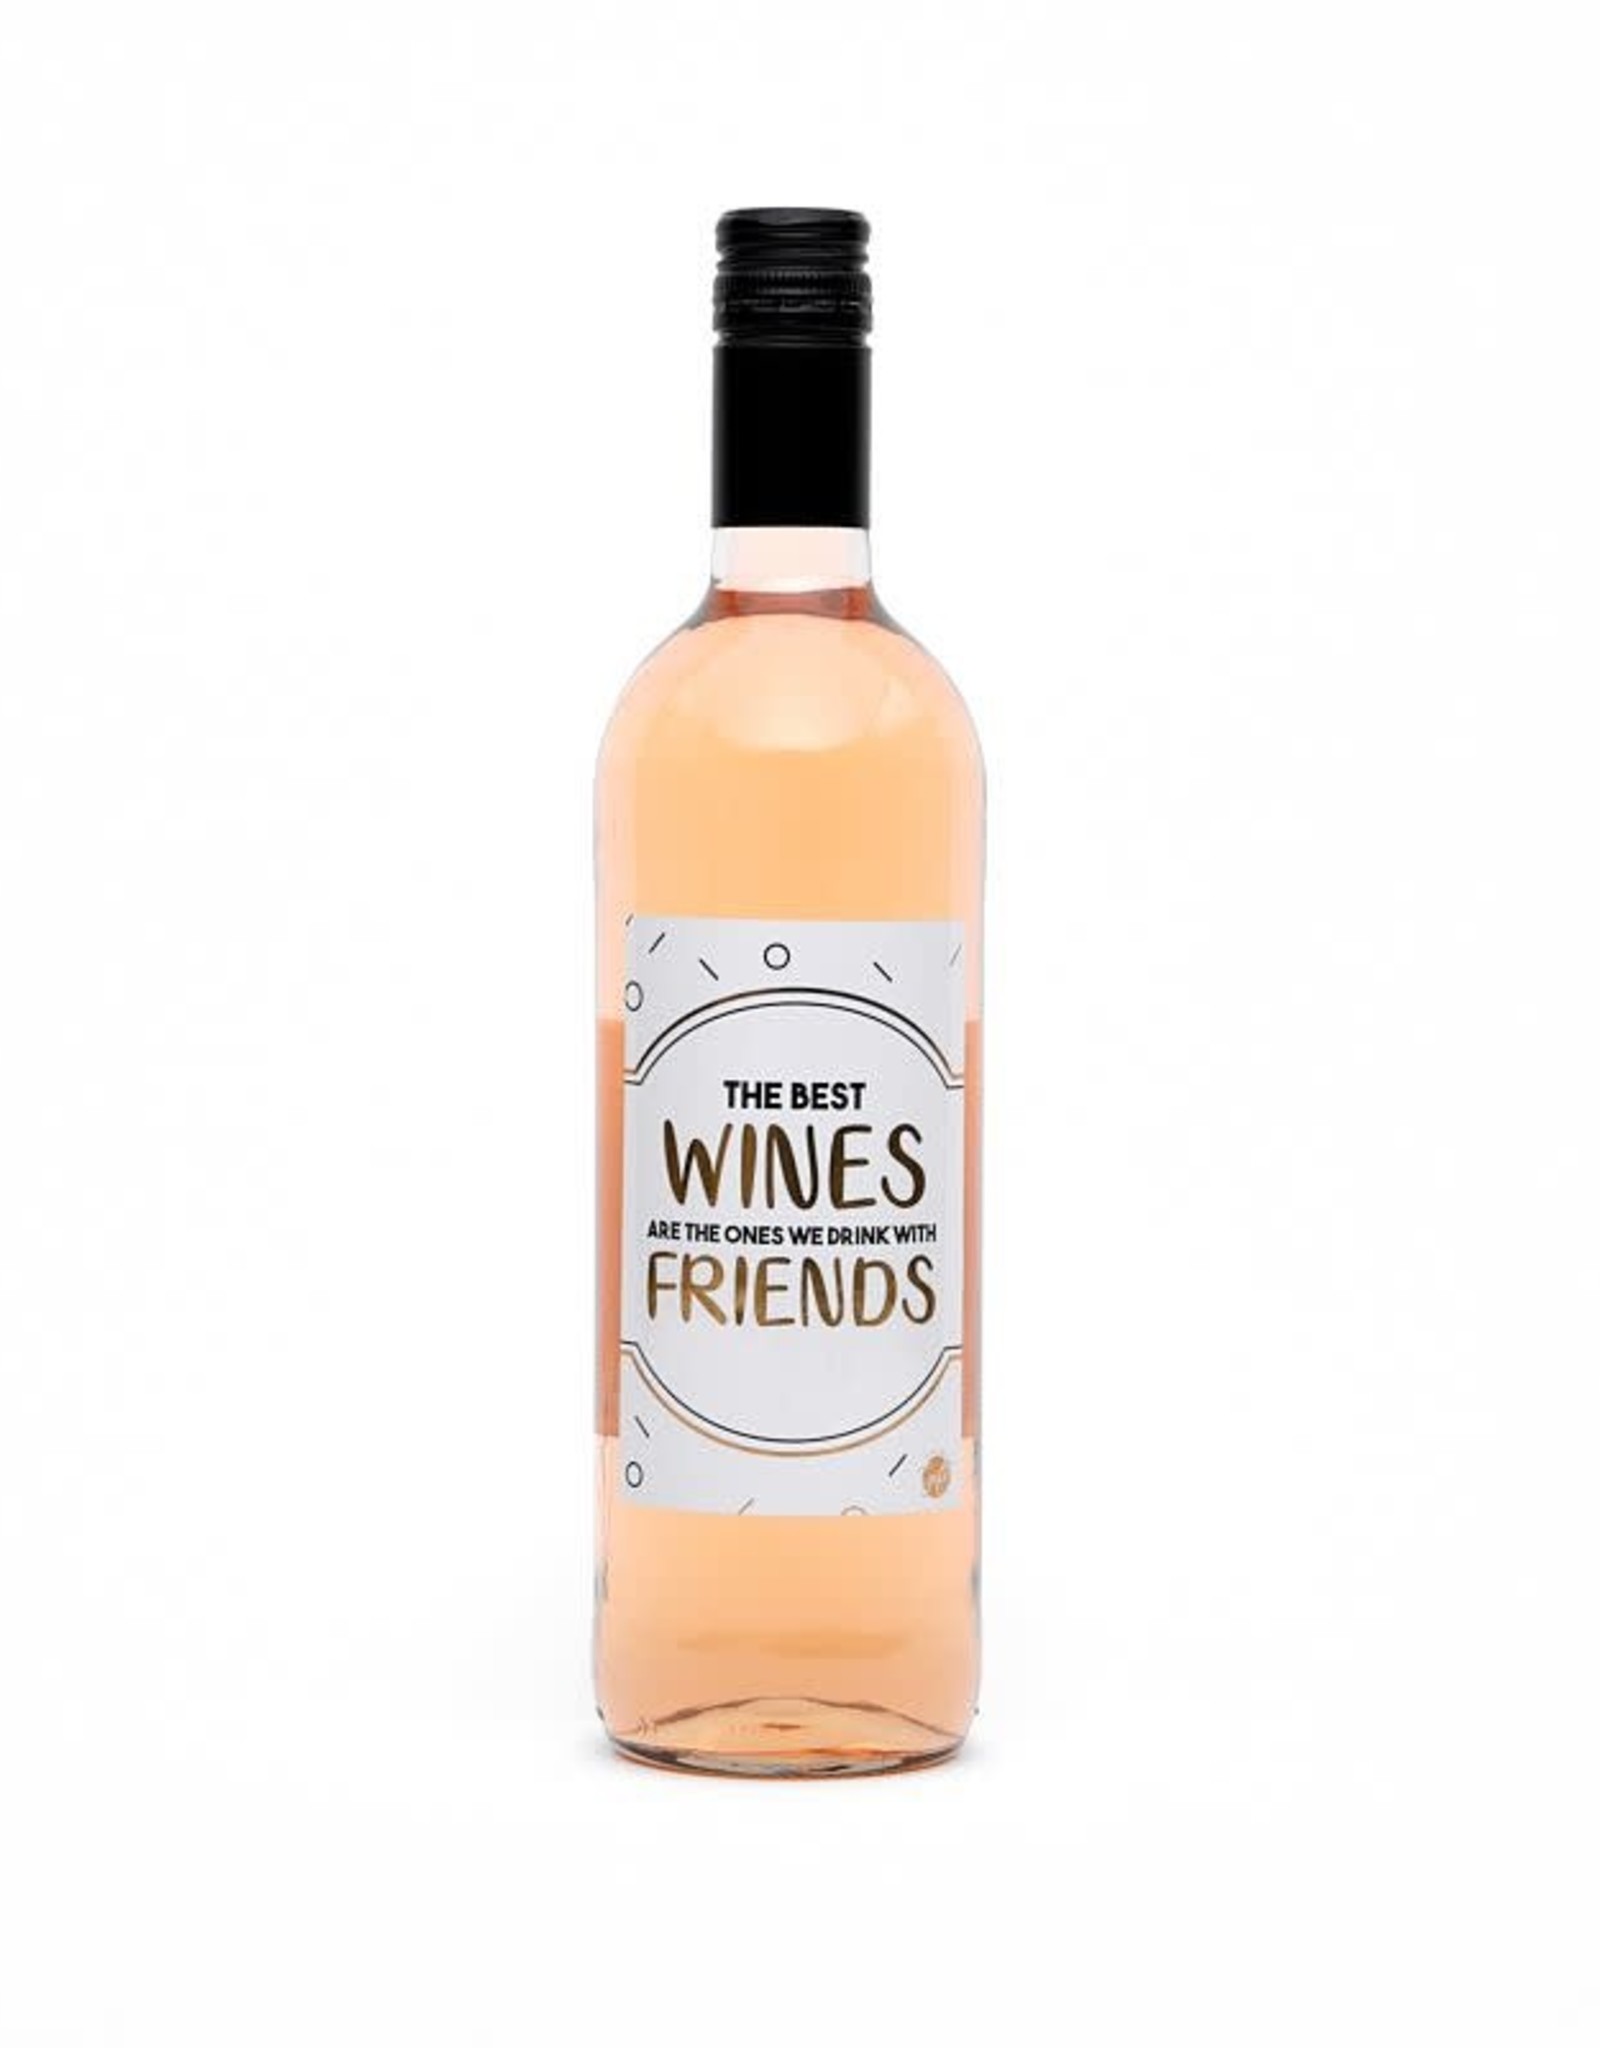 The Big Gifts Wijnfles Rosé "The Best Wines Are the one we drink with Friends" - The Big Gifts